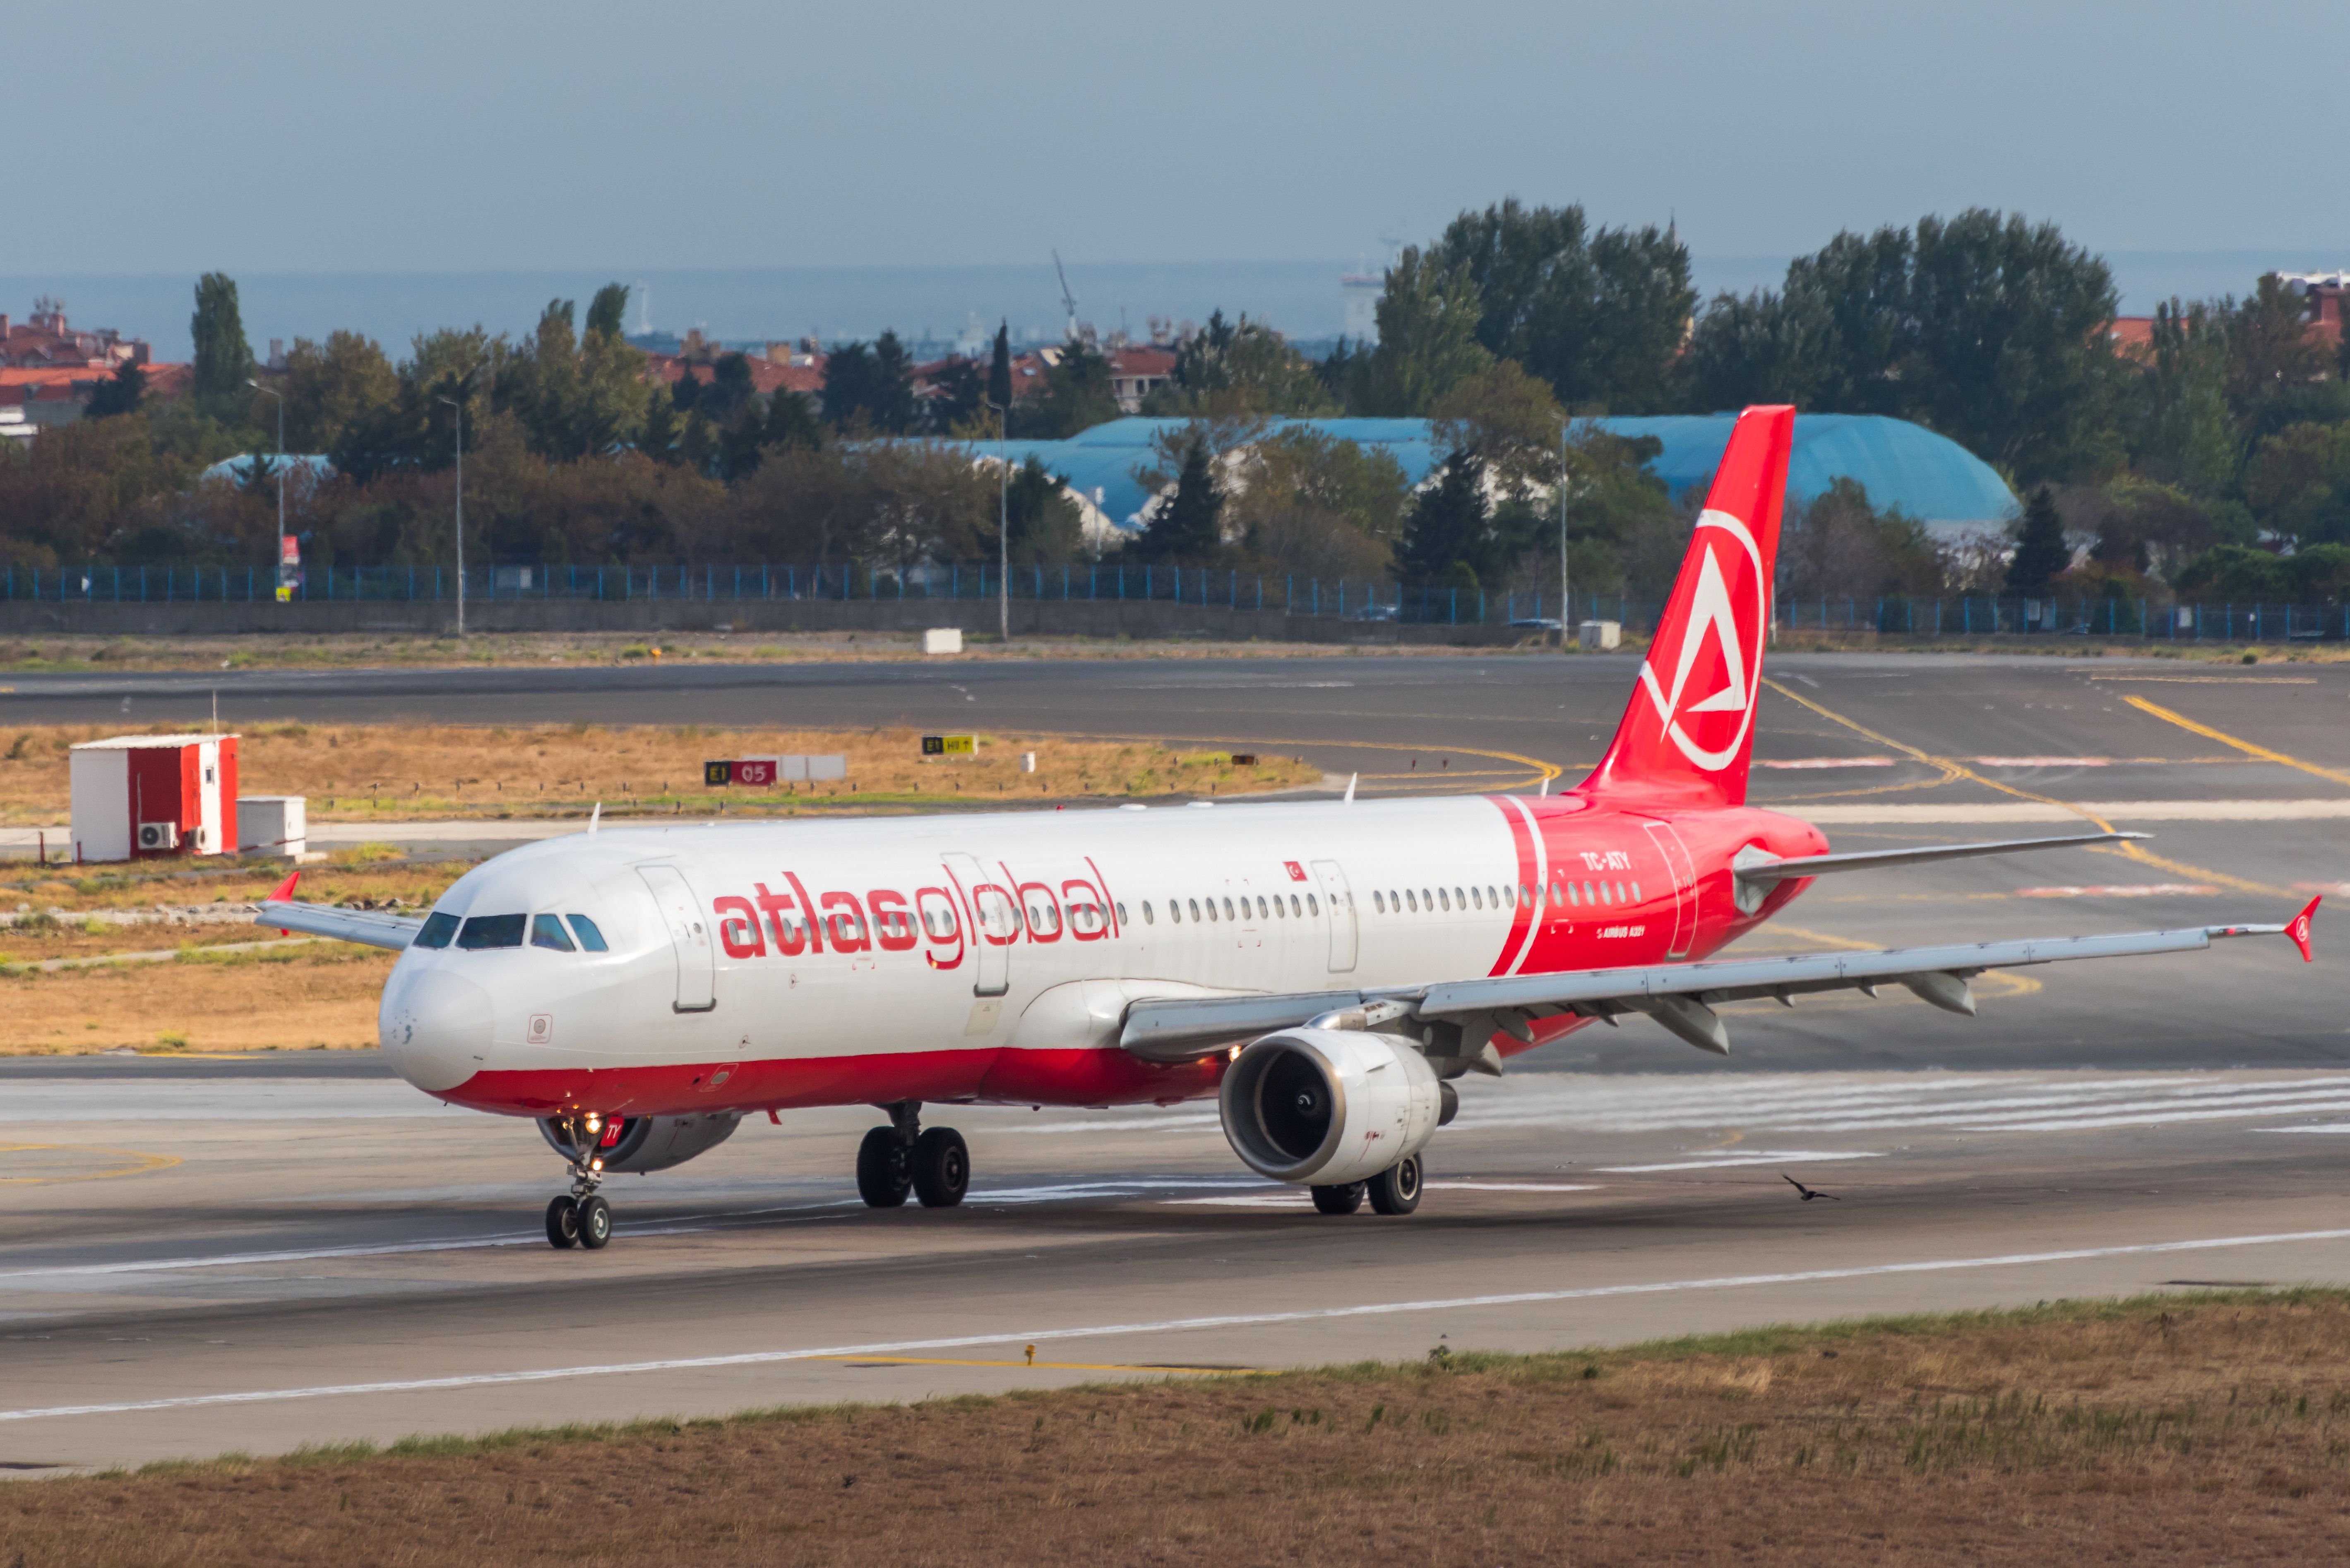 An AtlasGlobal Airbus A321 On The Runway In Istanbul.